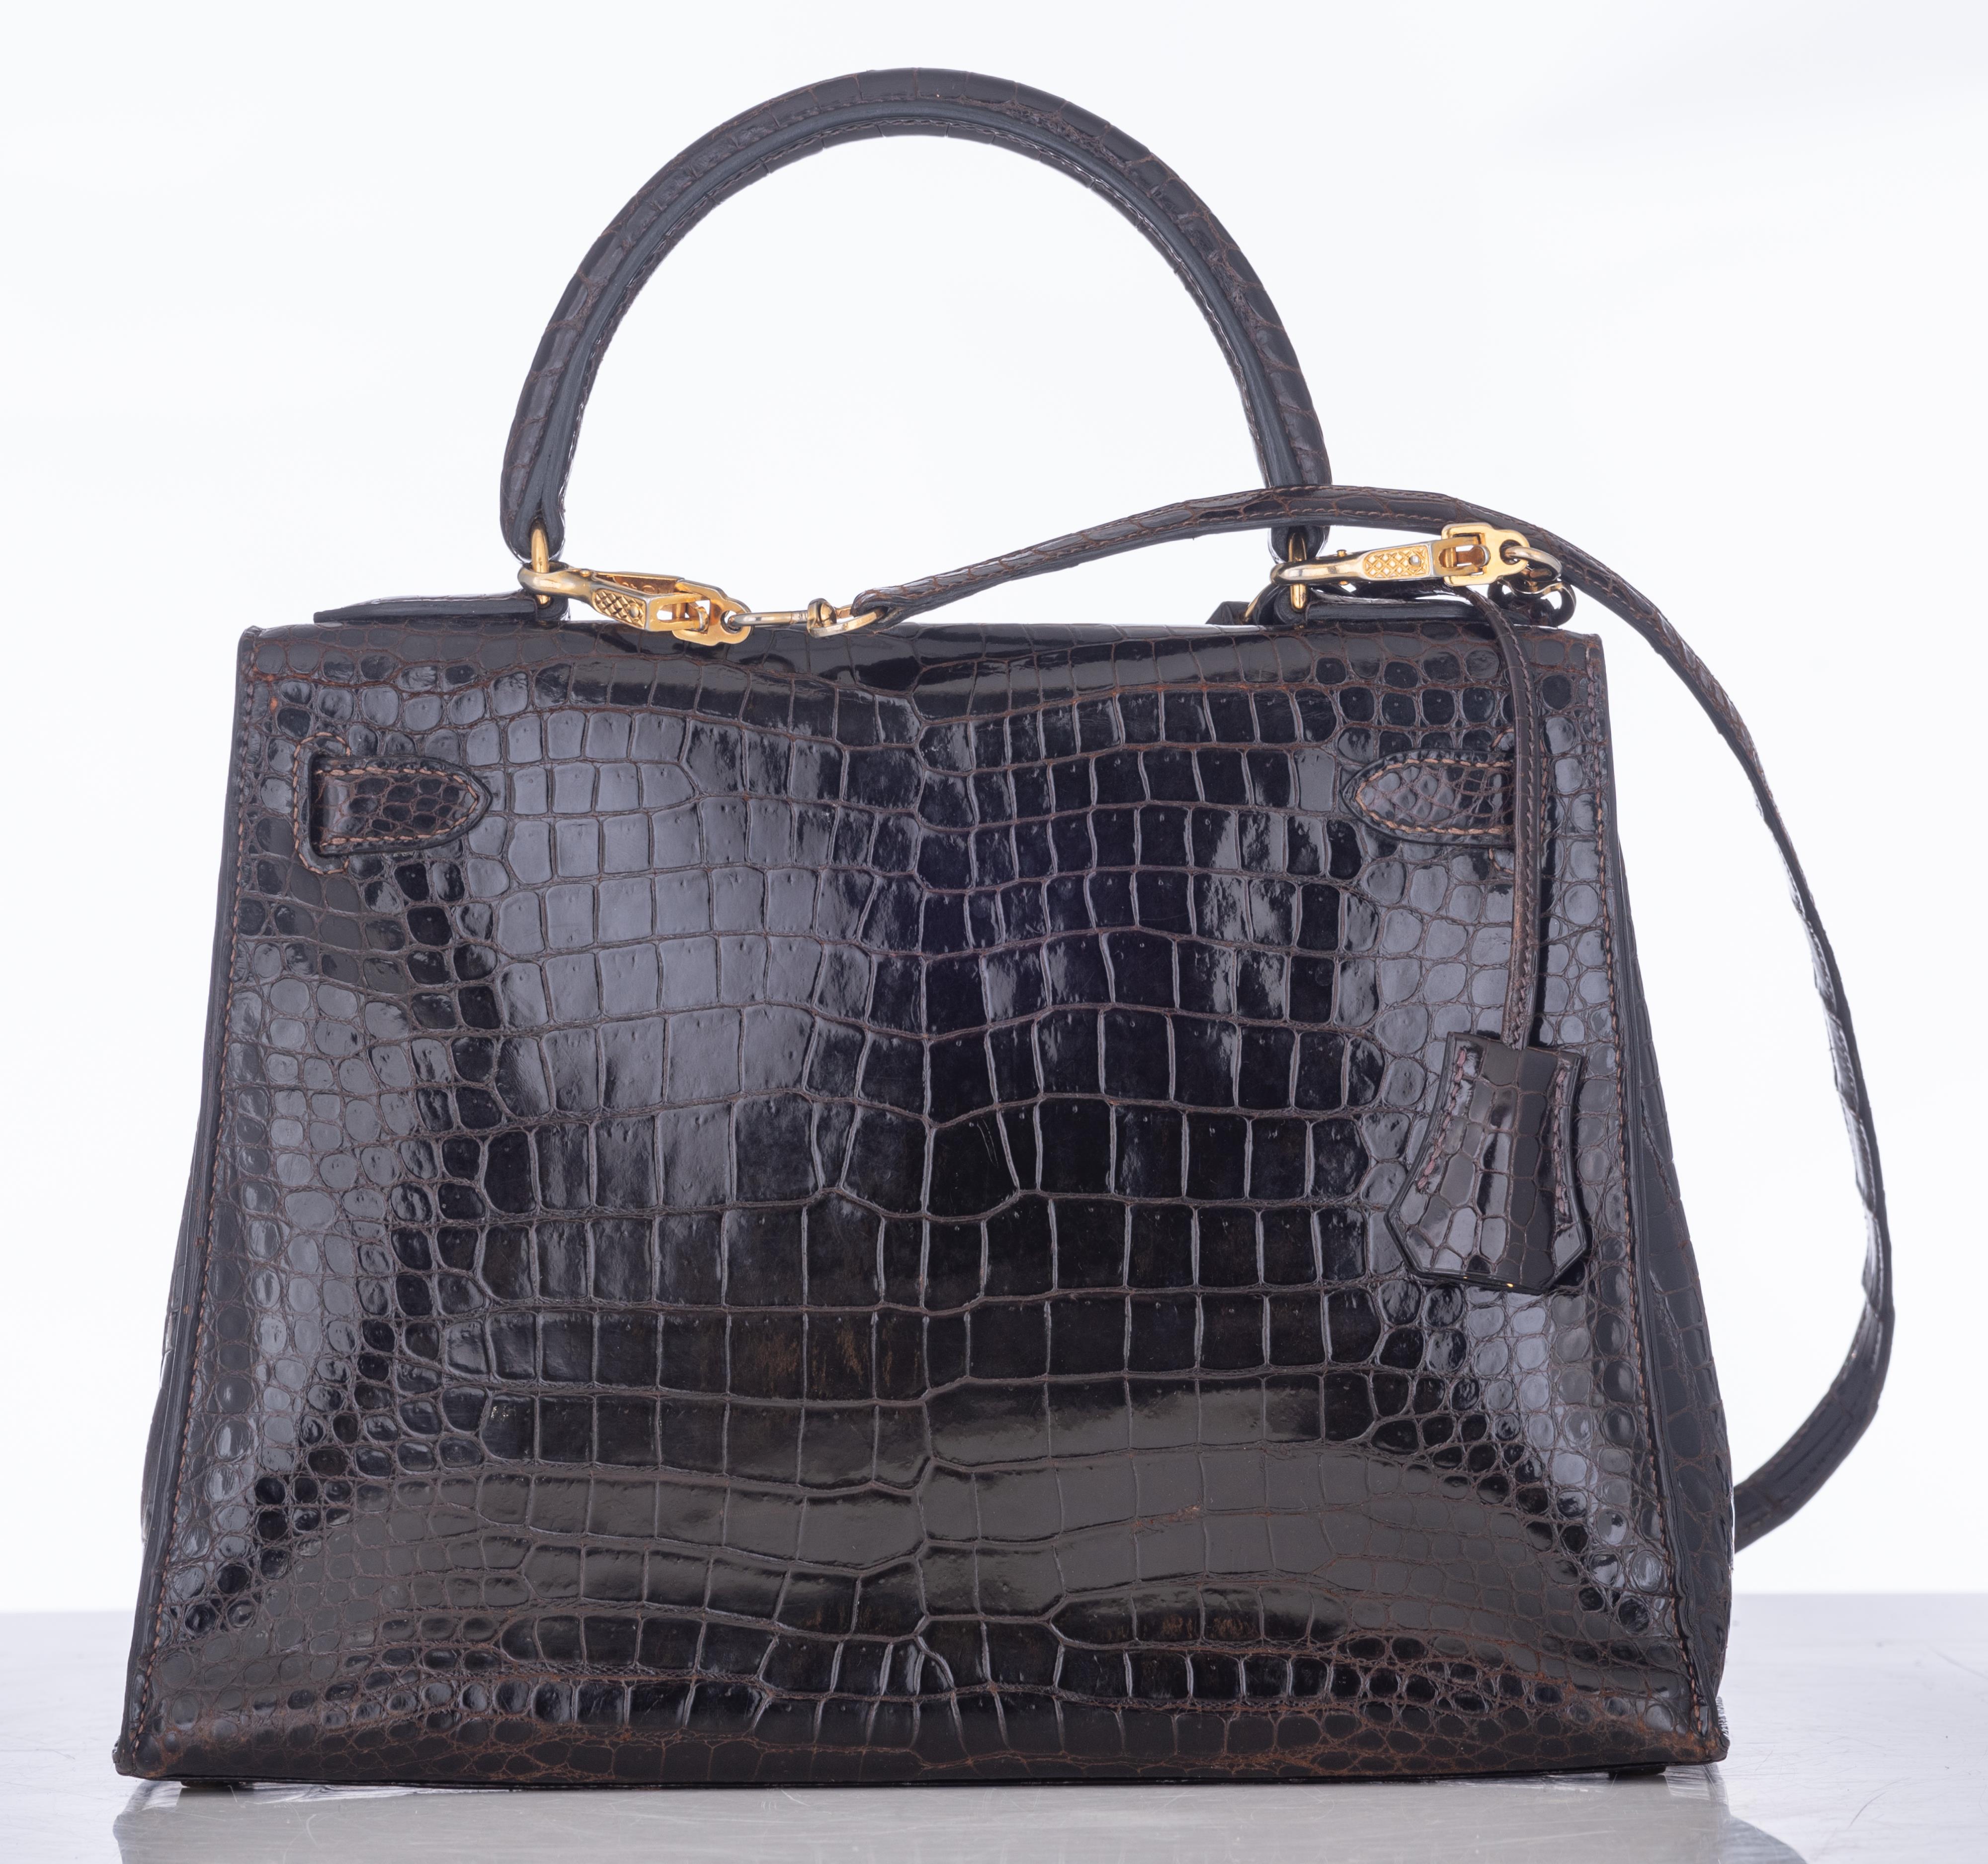 HERMÈS, Kelly Sellier 29 bag, Brown crocodile leather, with gilt metal hardware, Vintage about 1975 - Image 4 of 15